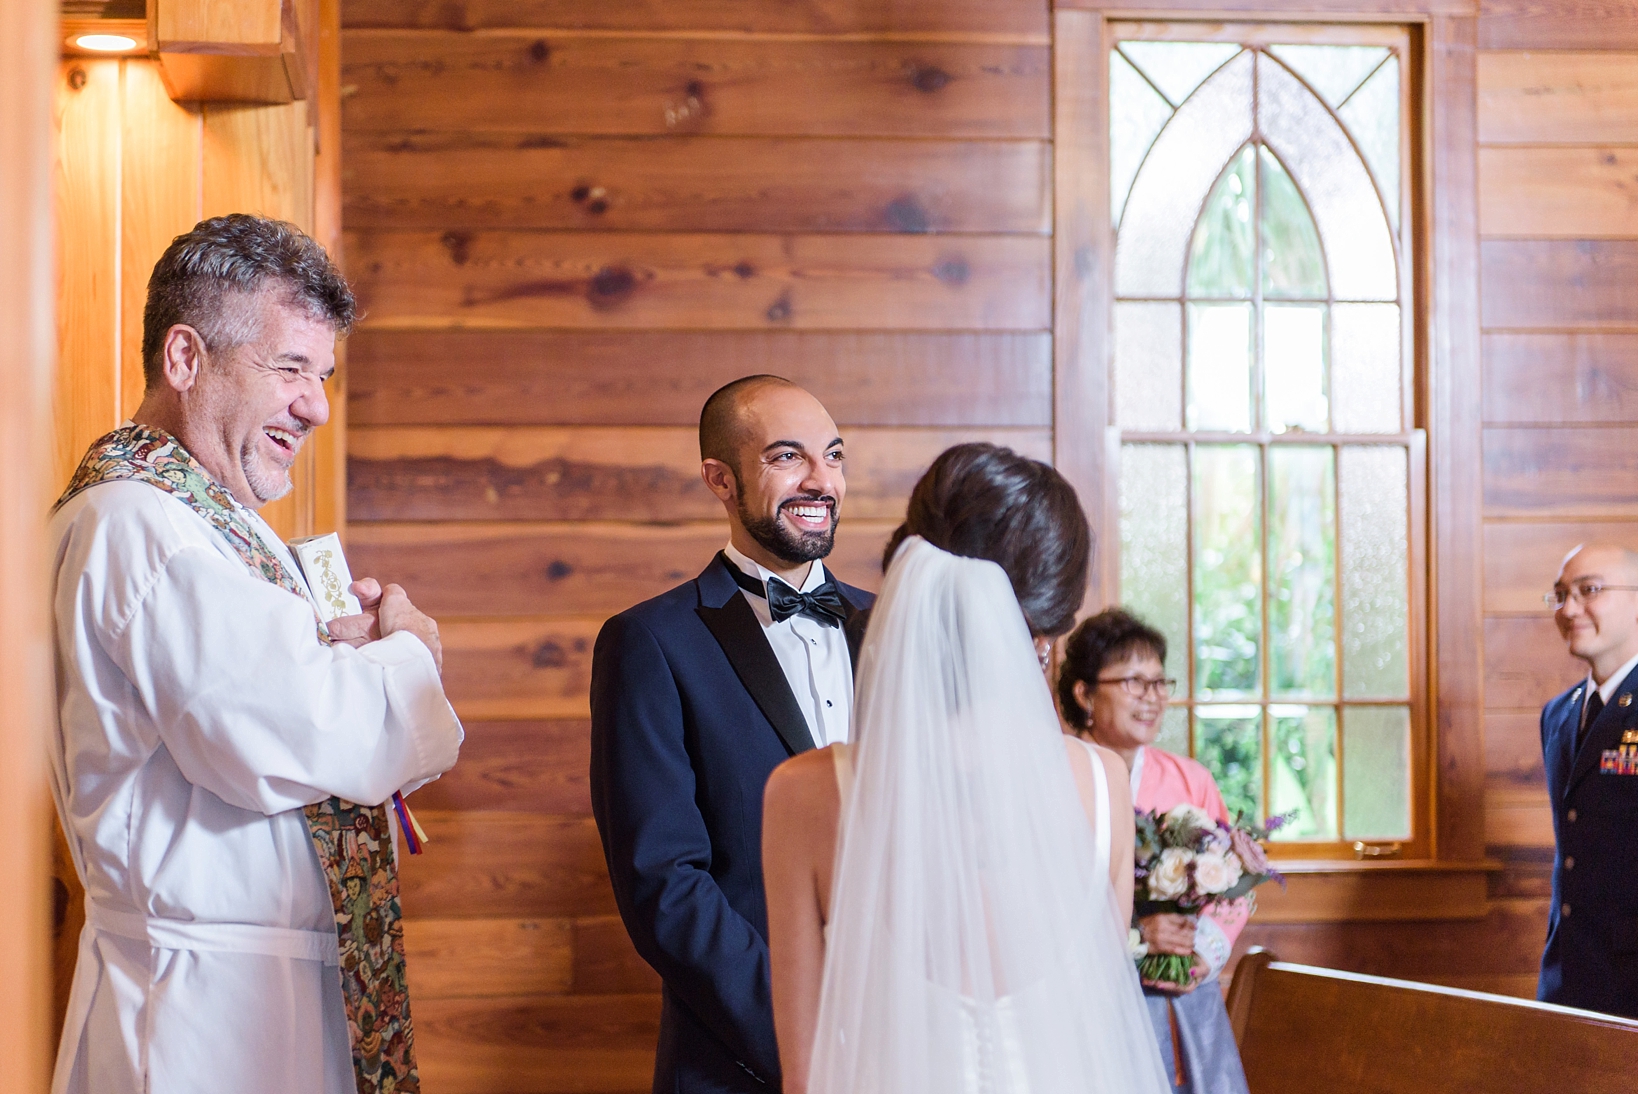 Groom smiling at his bride during the wedding ceremony by Sarah & Ben Photography